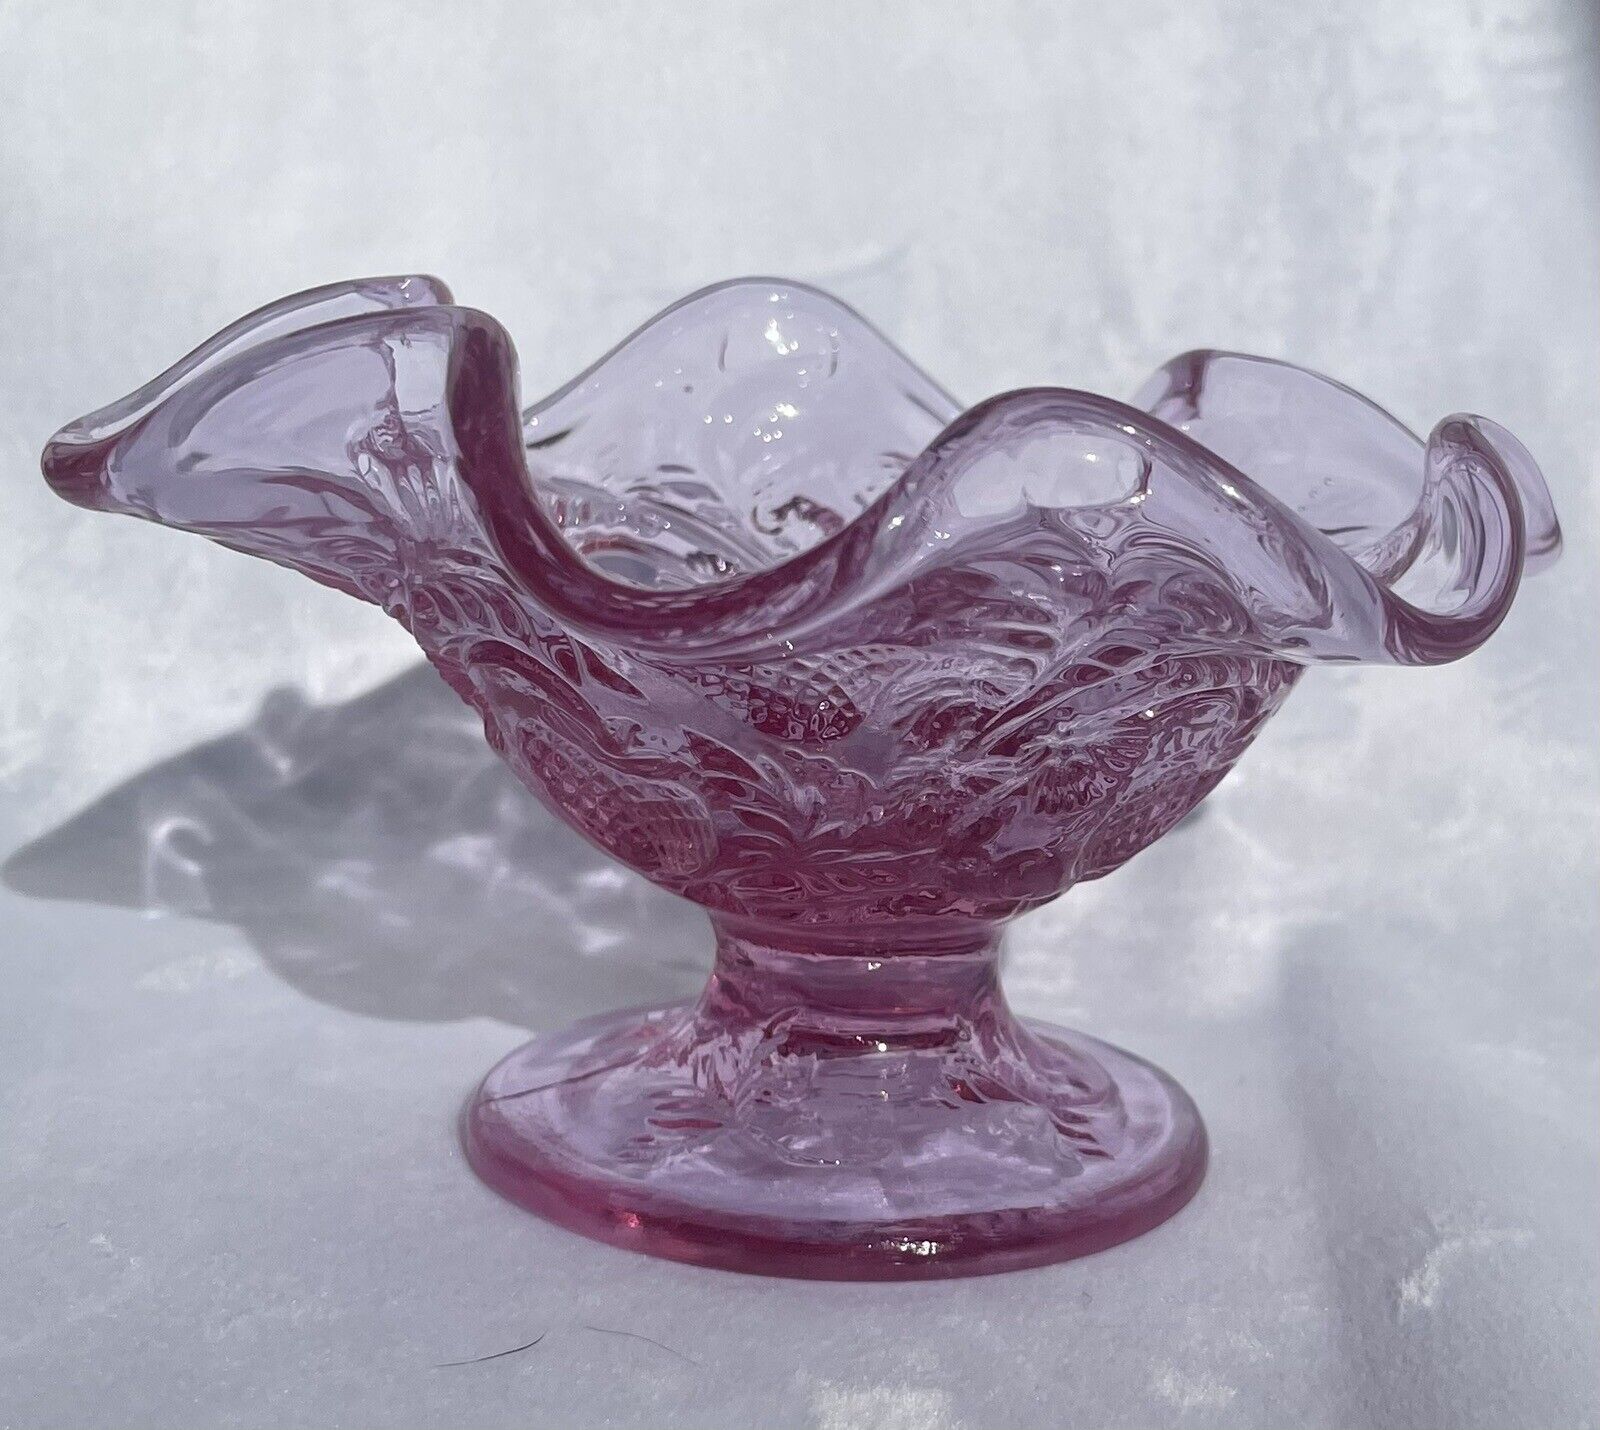 Vintage Fenton Ruffled Pink Strawberry Compote / Candy Dish 3”x4.75” Stamped